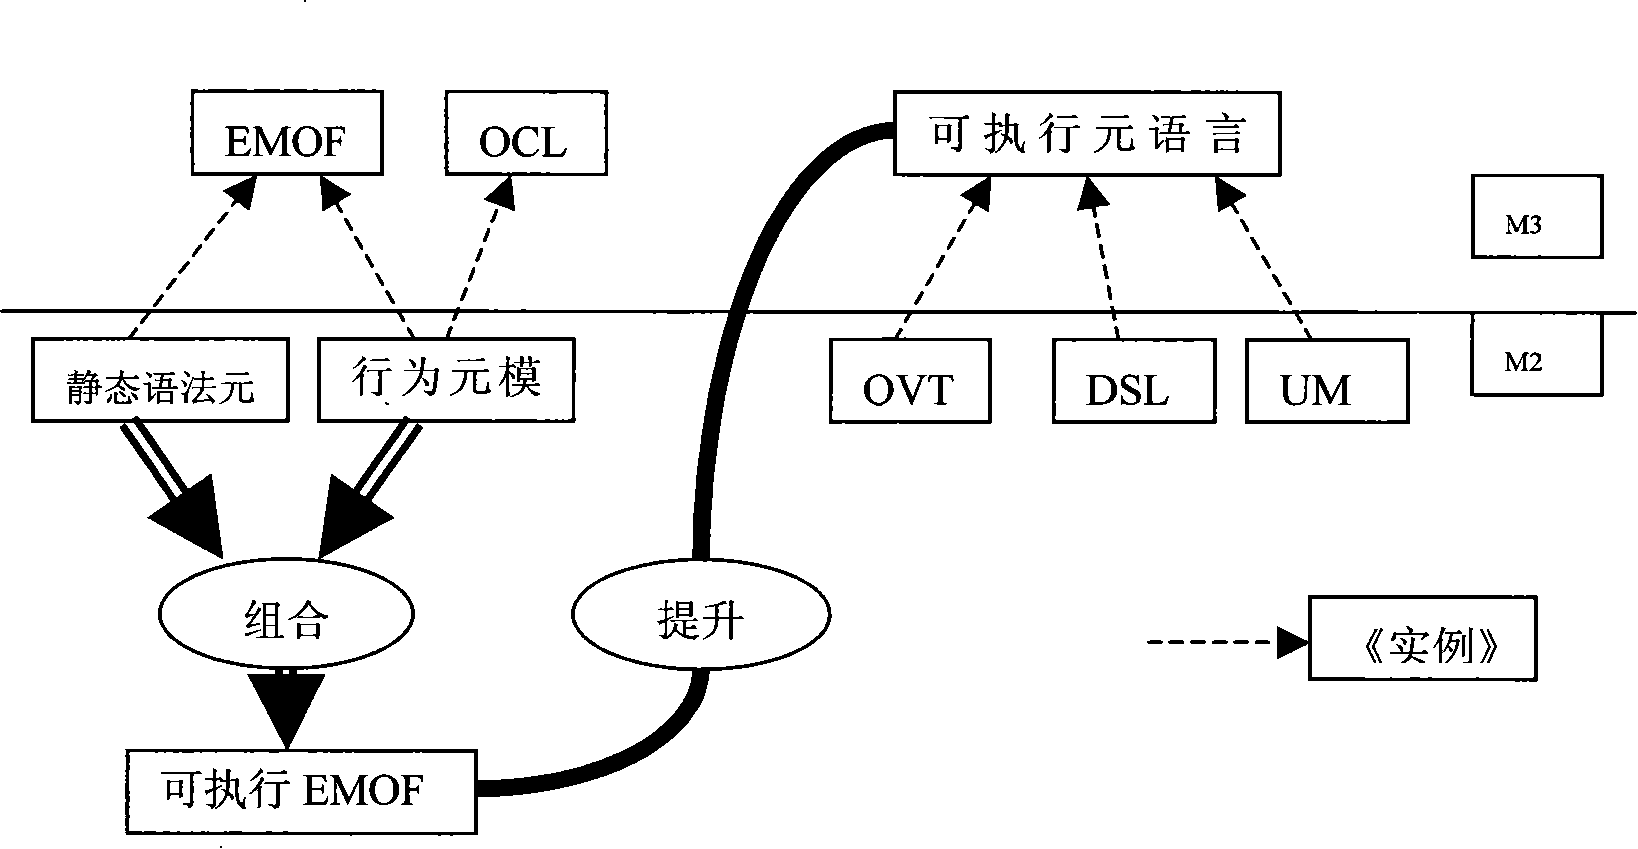 Modeling method based on electric communication field capable of performing meta language